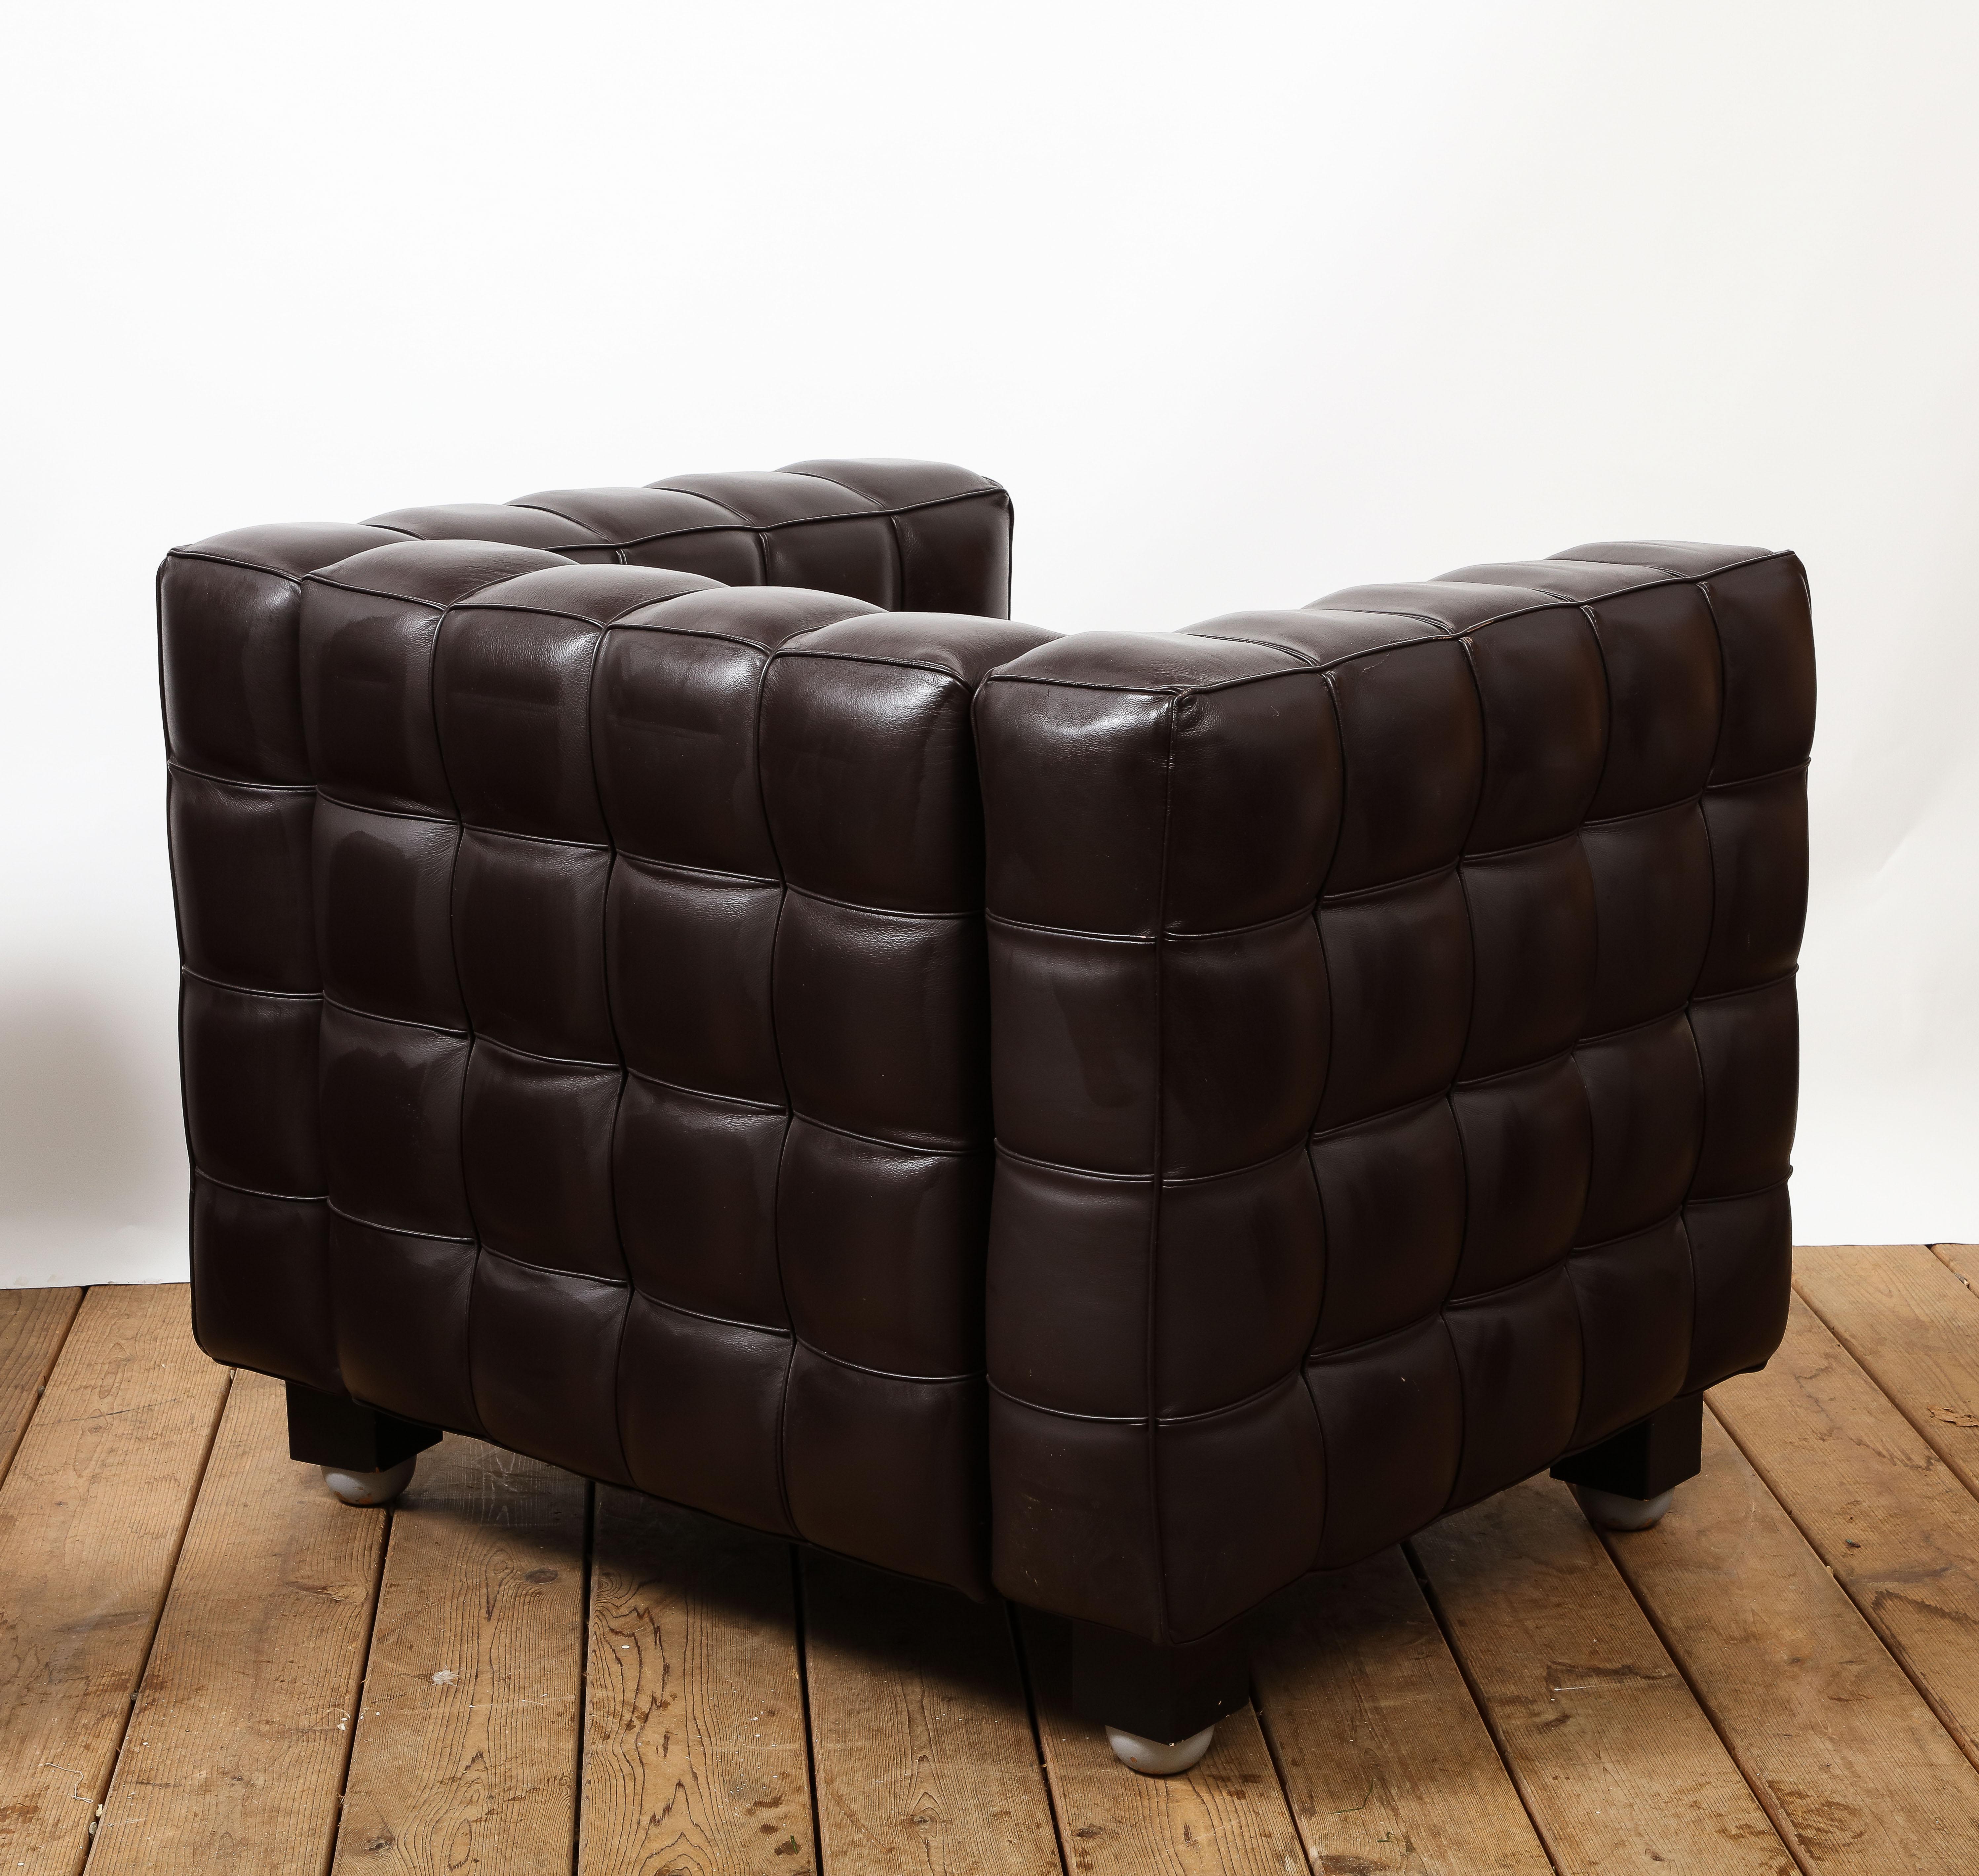 Pair of Josef Hoffmann for Wittmann Kubus Chairs in Dark Brown Leather 4